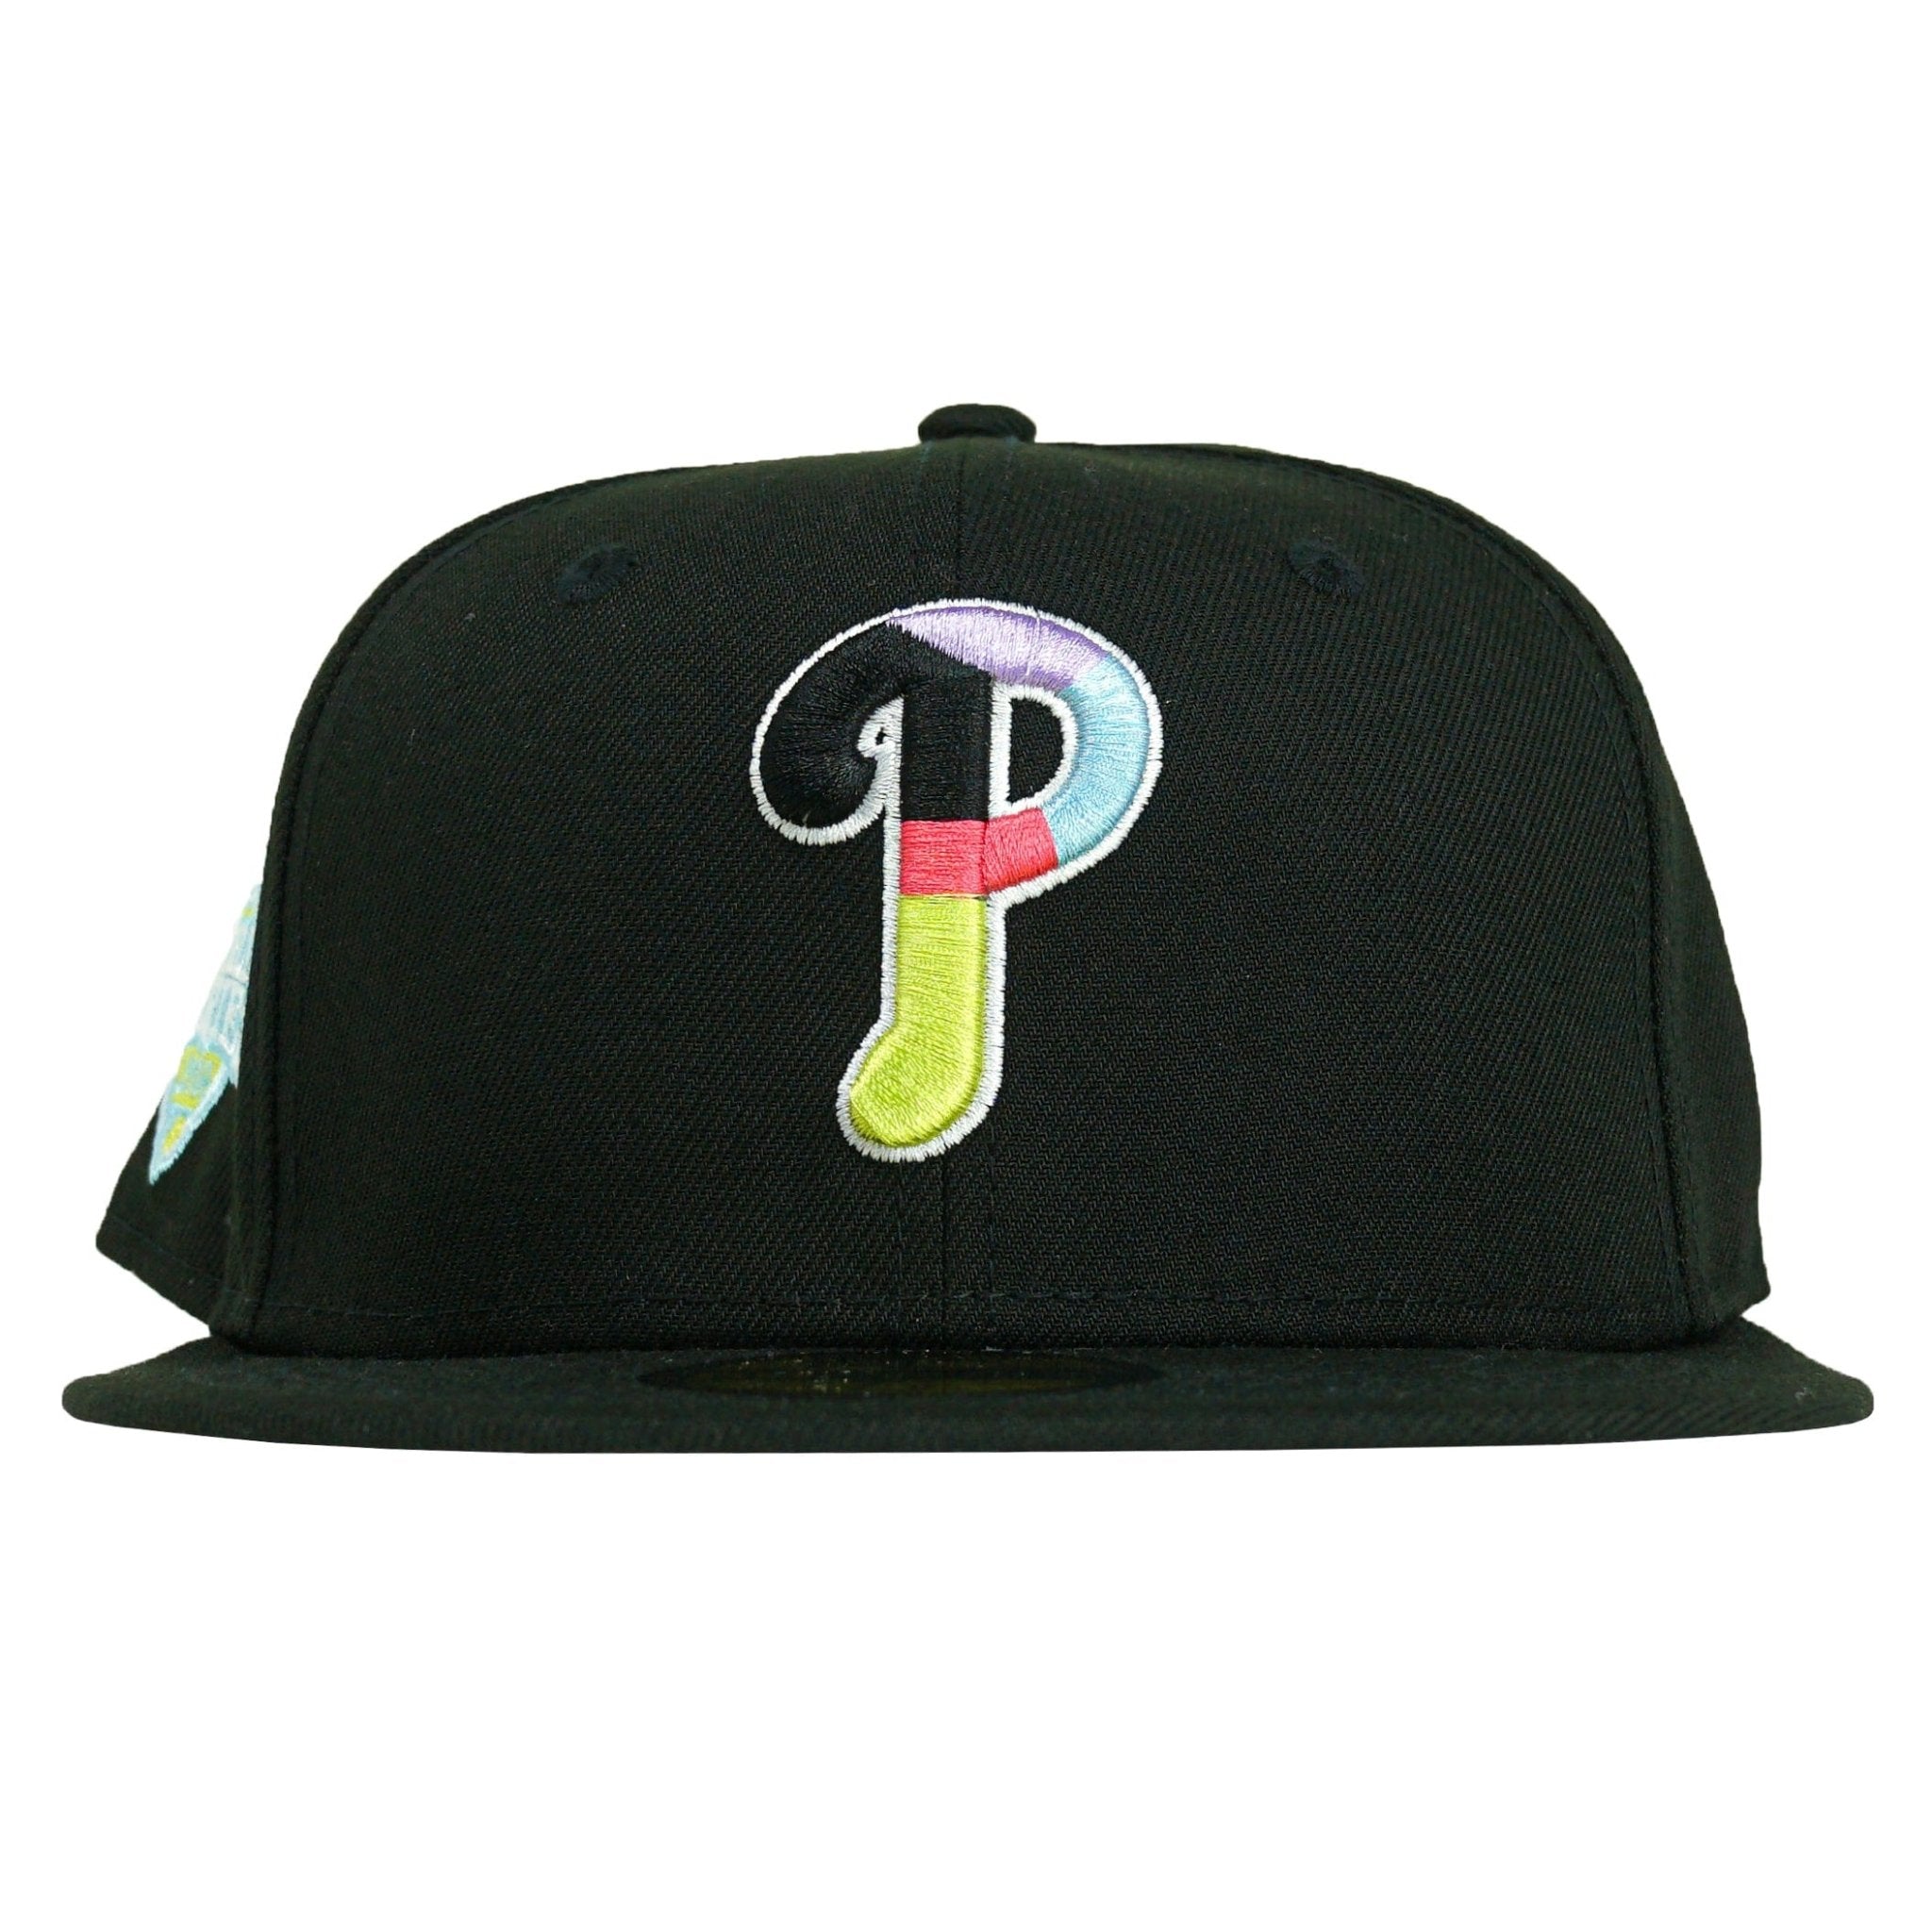 Philadelphia Phillies Colorpack 59Fifty Fitted Hat in black